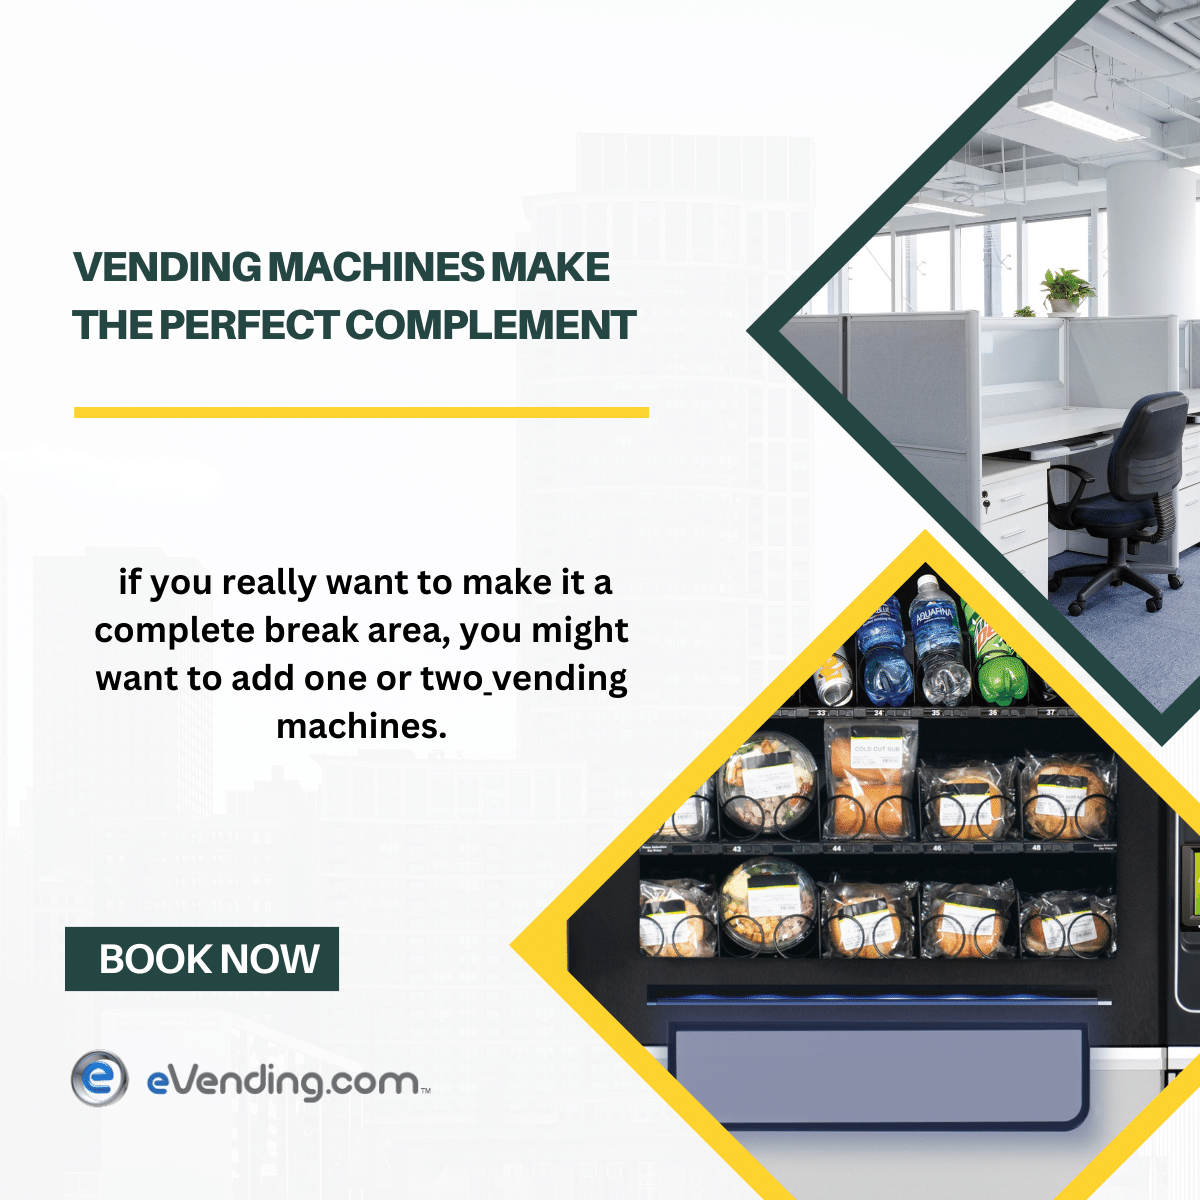 ARE YOU INTERESTED IN BUYING SNACK VENDING MACHINES FOR YOUR FACTORY BREAK ROOMS?